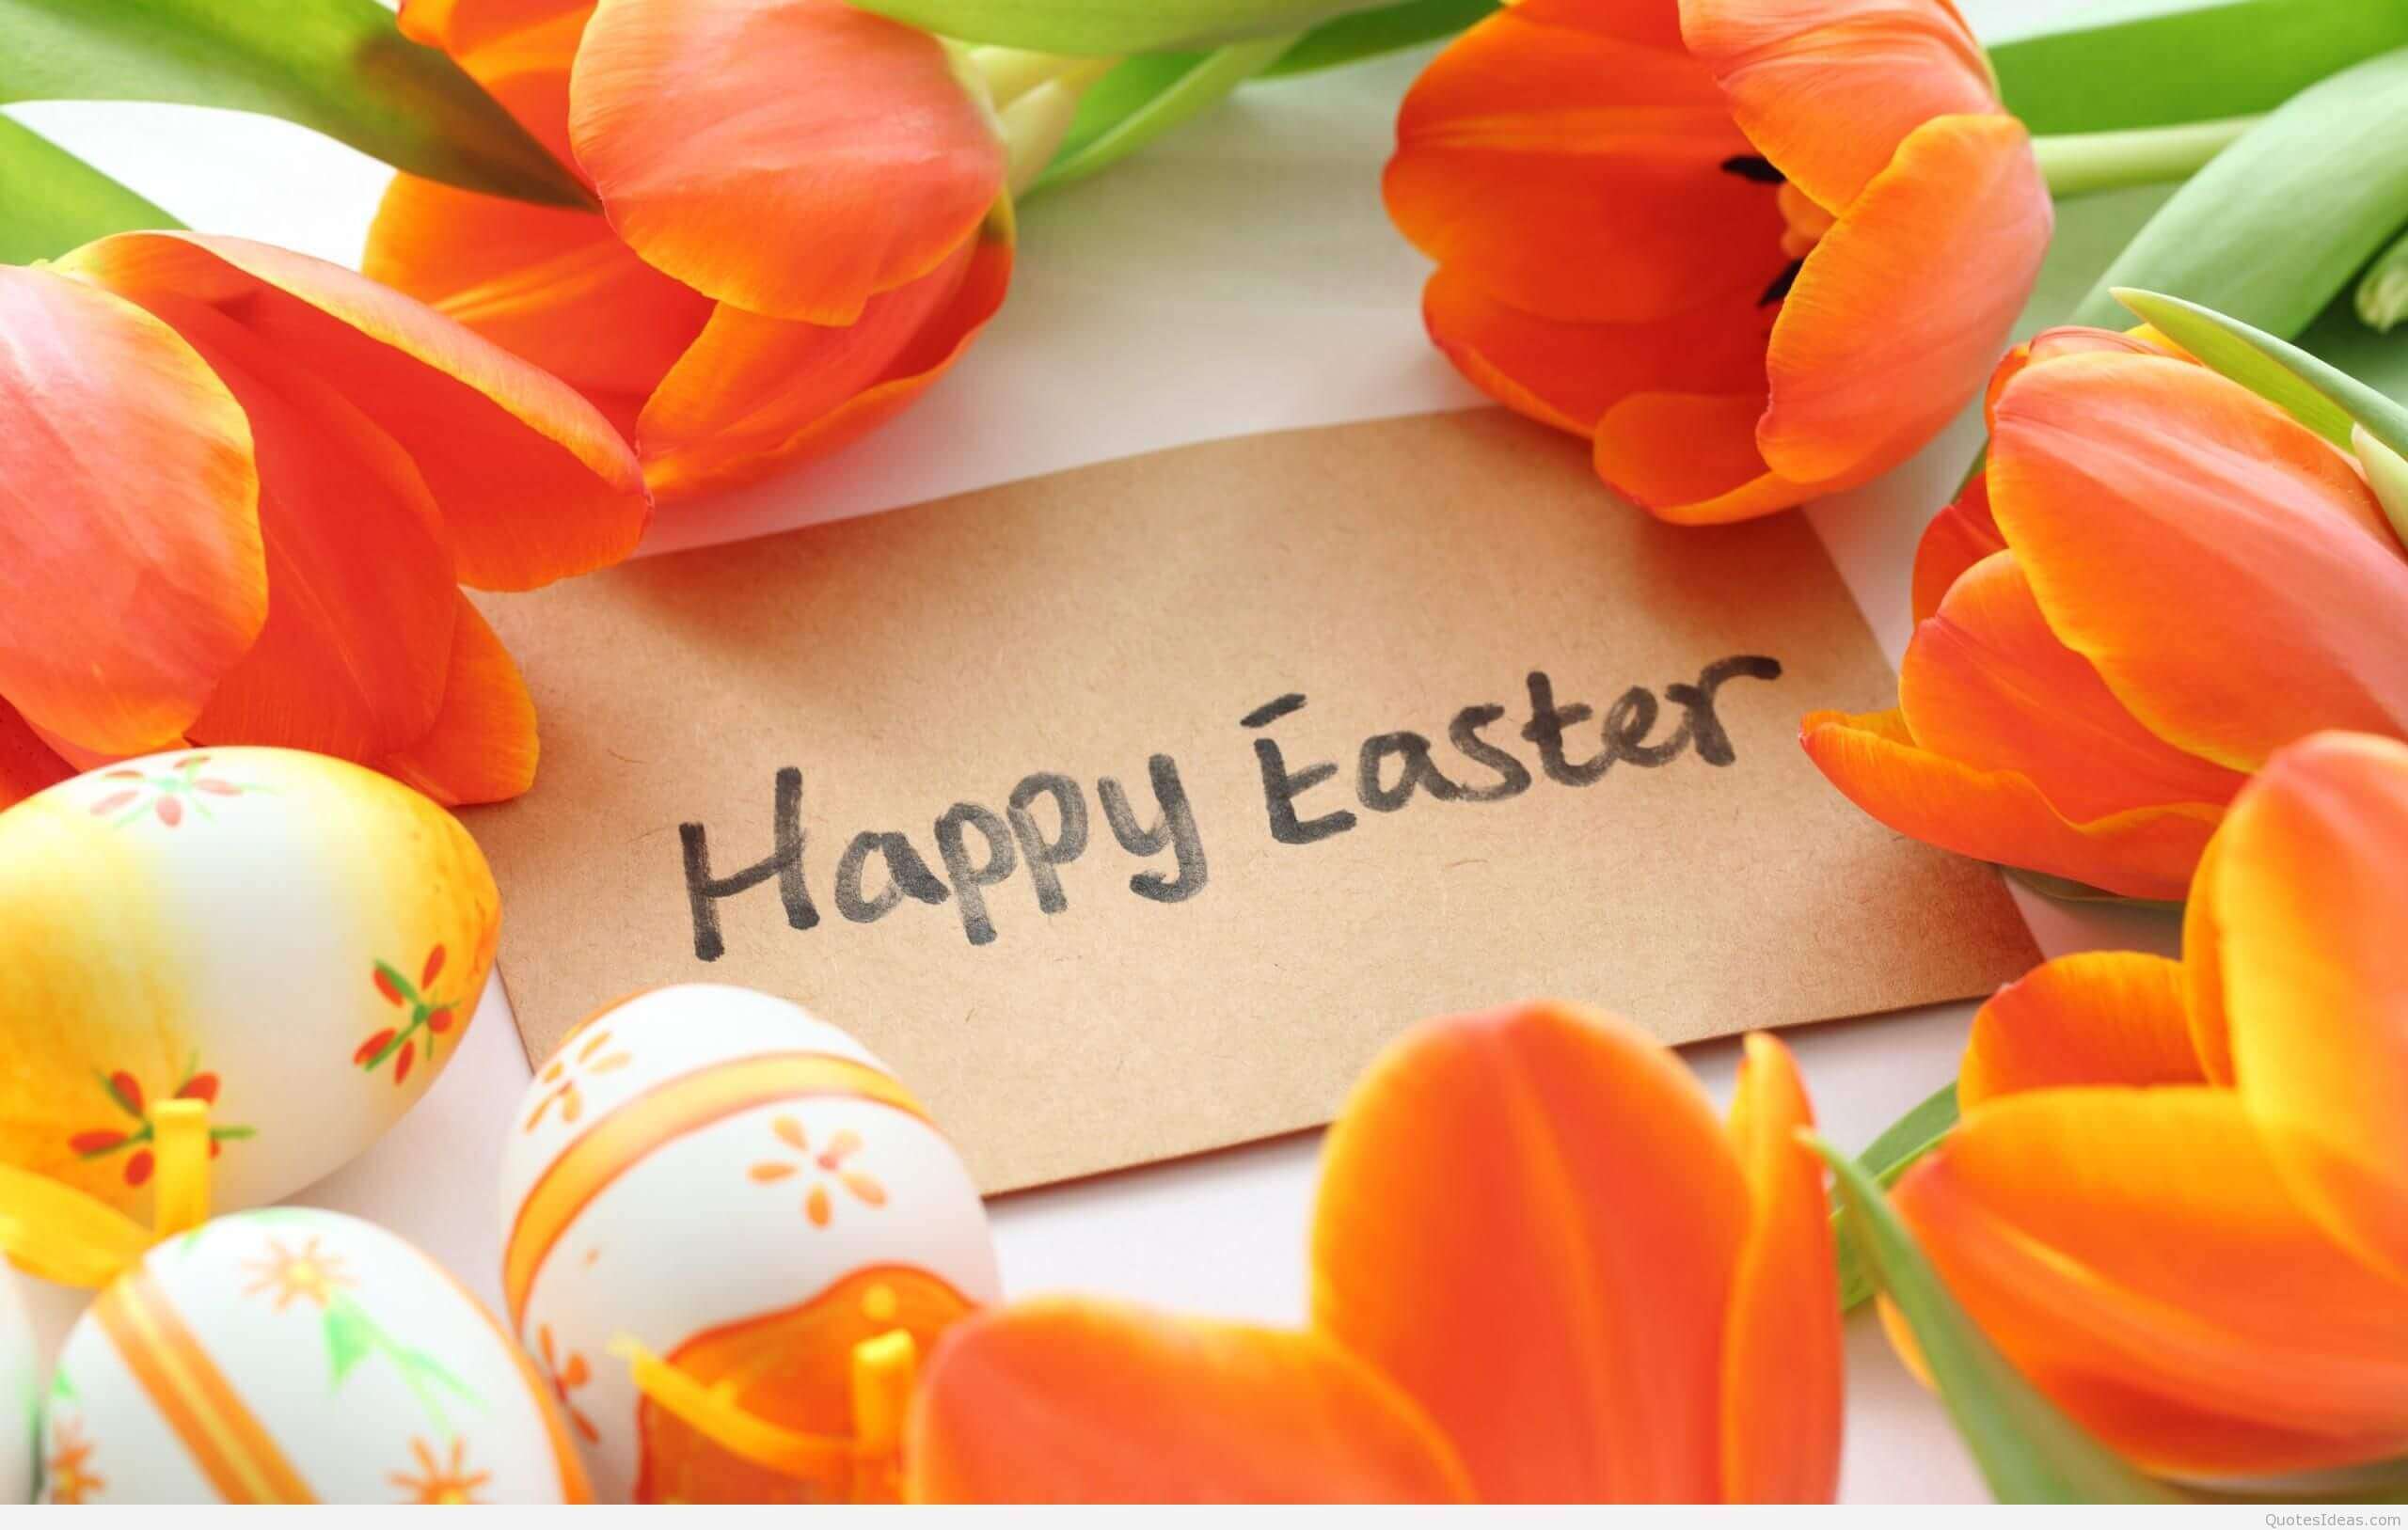 Happy Easter Image 2020 Picture, Photo, Free HD Wallpaper